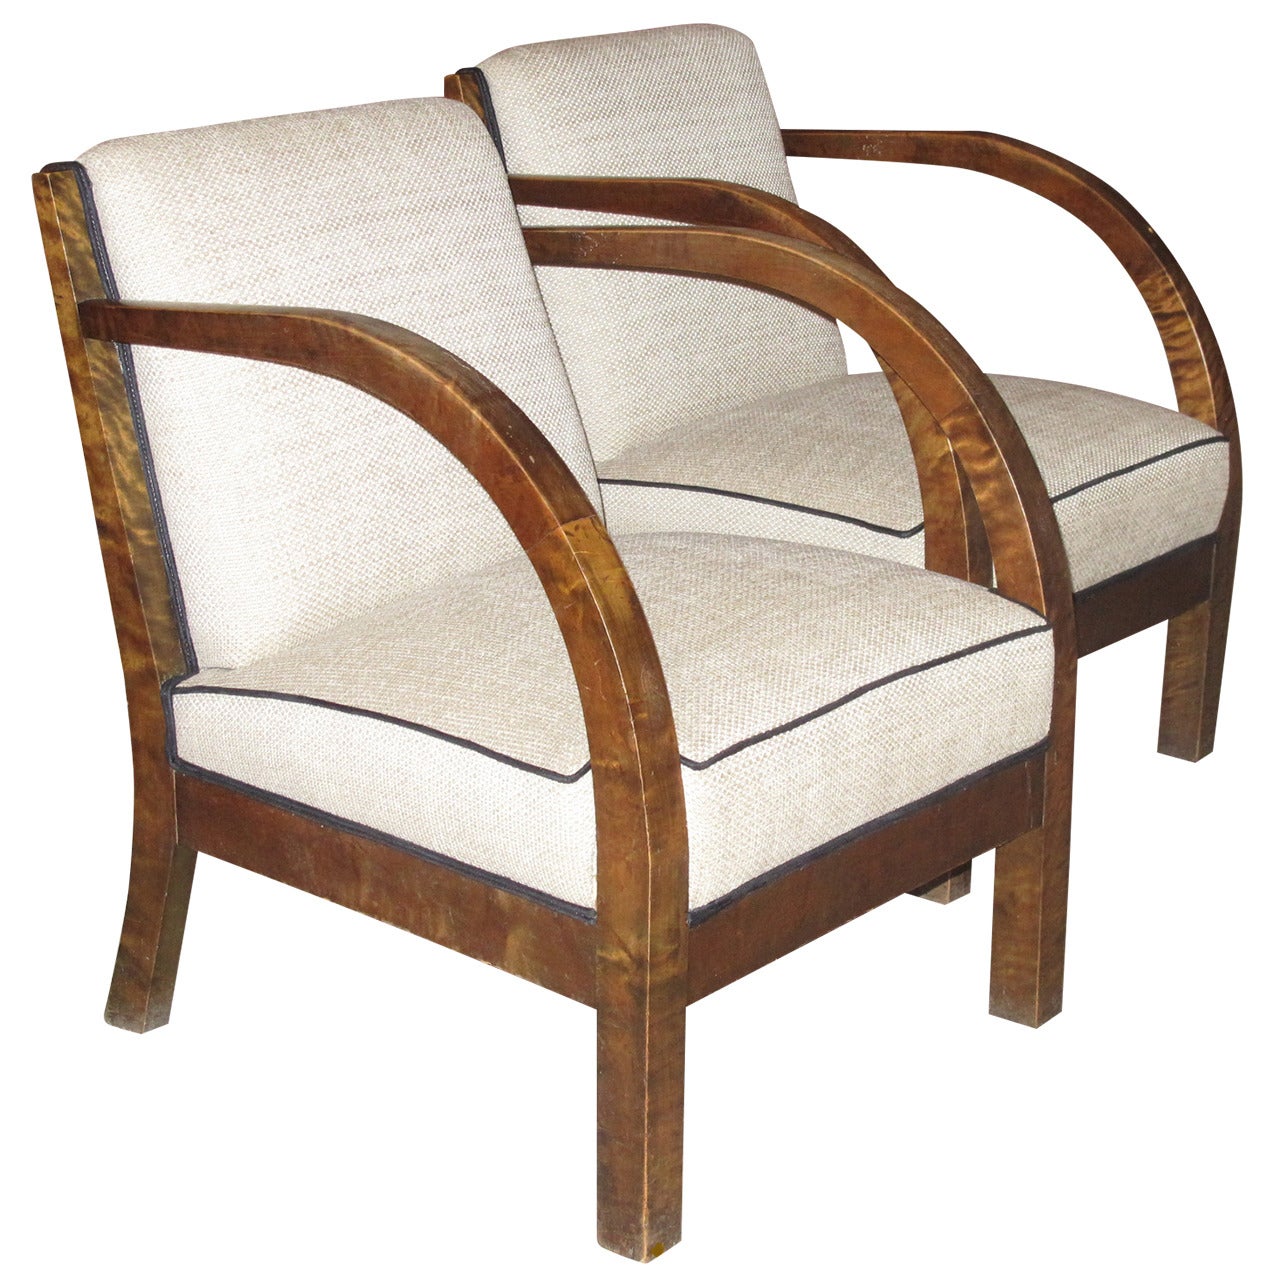 Pair of Danish 1930s Birch Wood Armchairs with Curved Arms